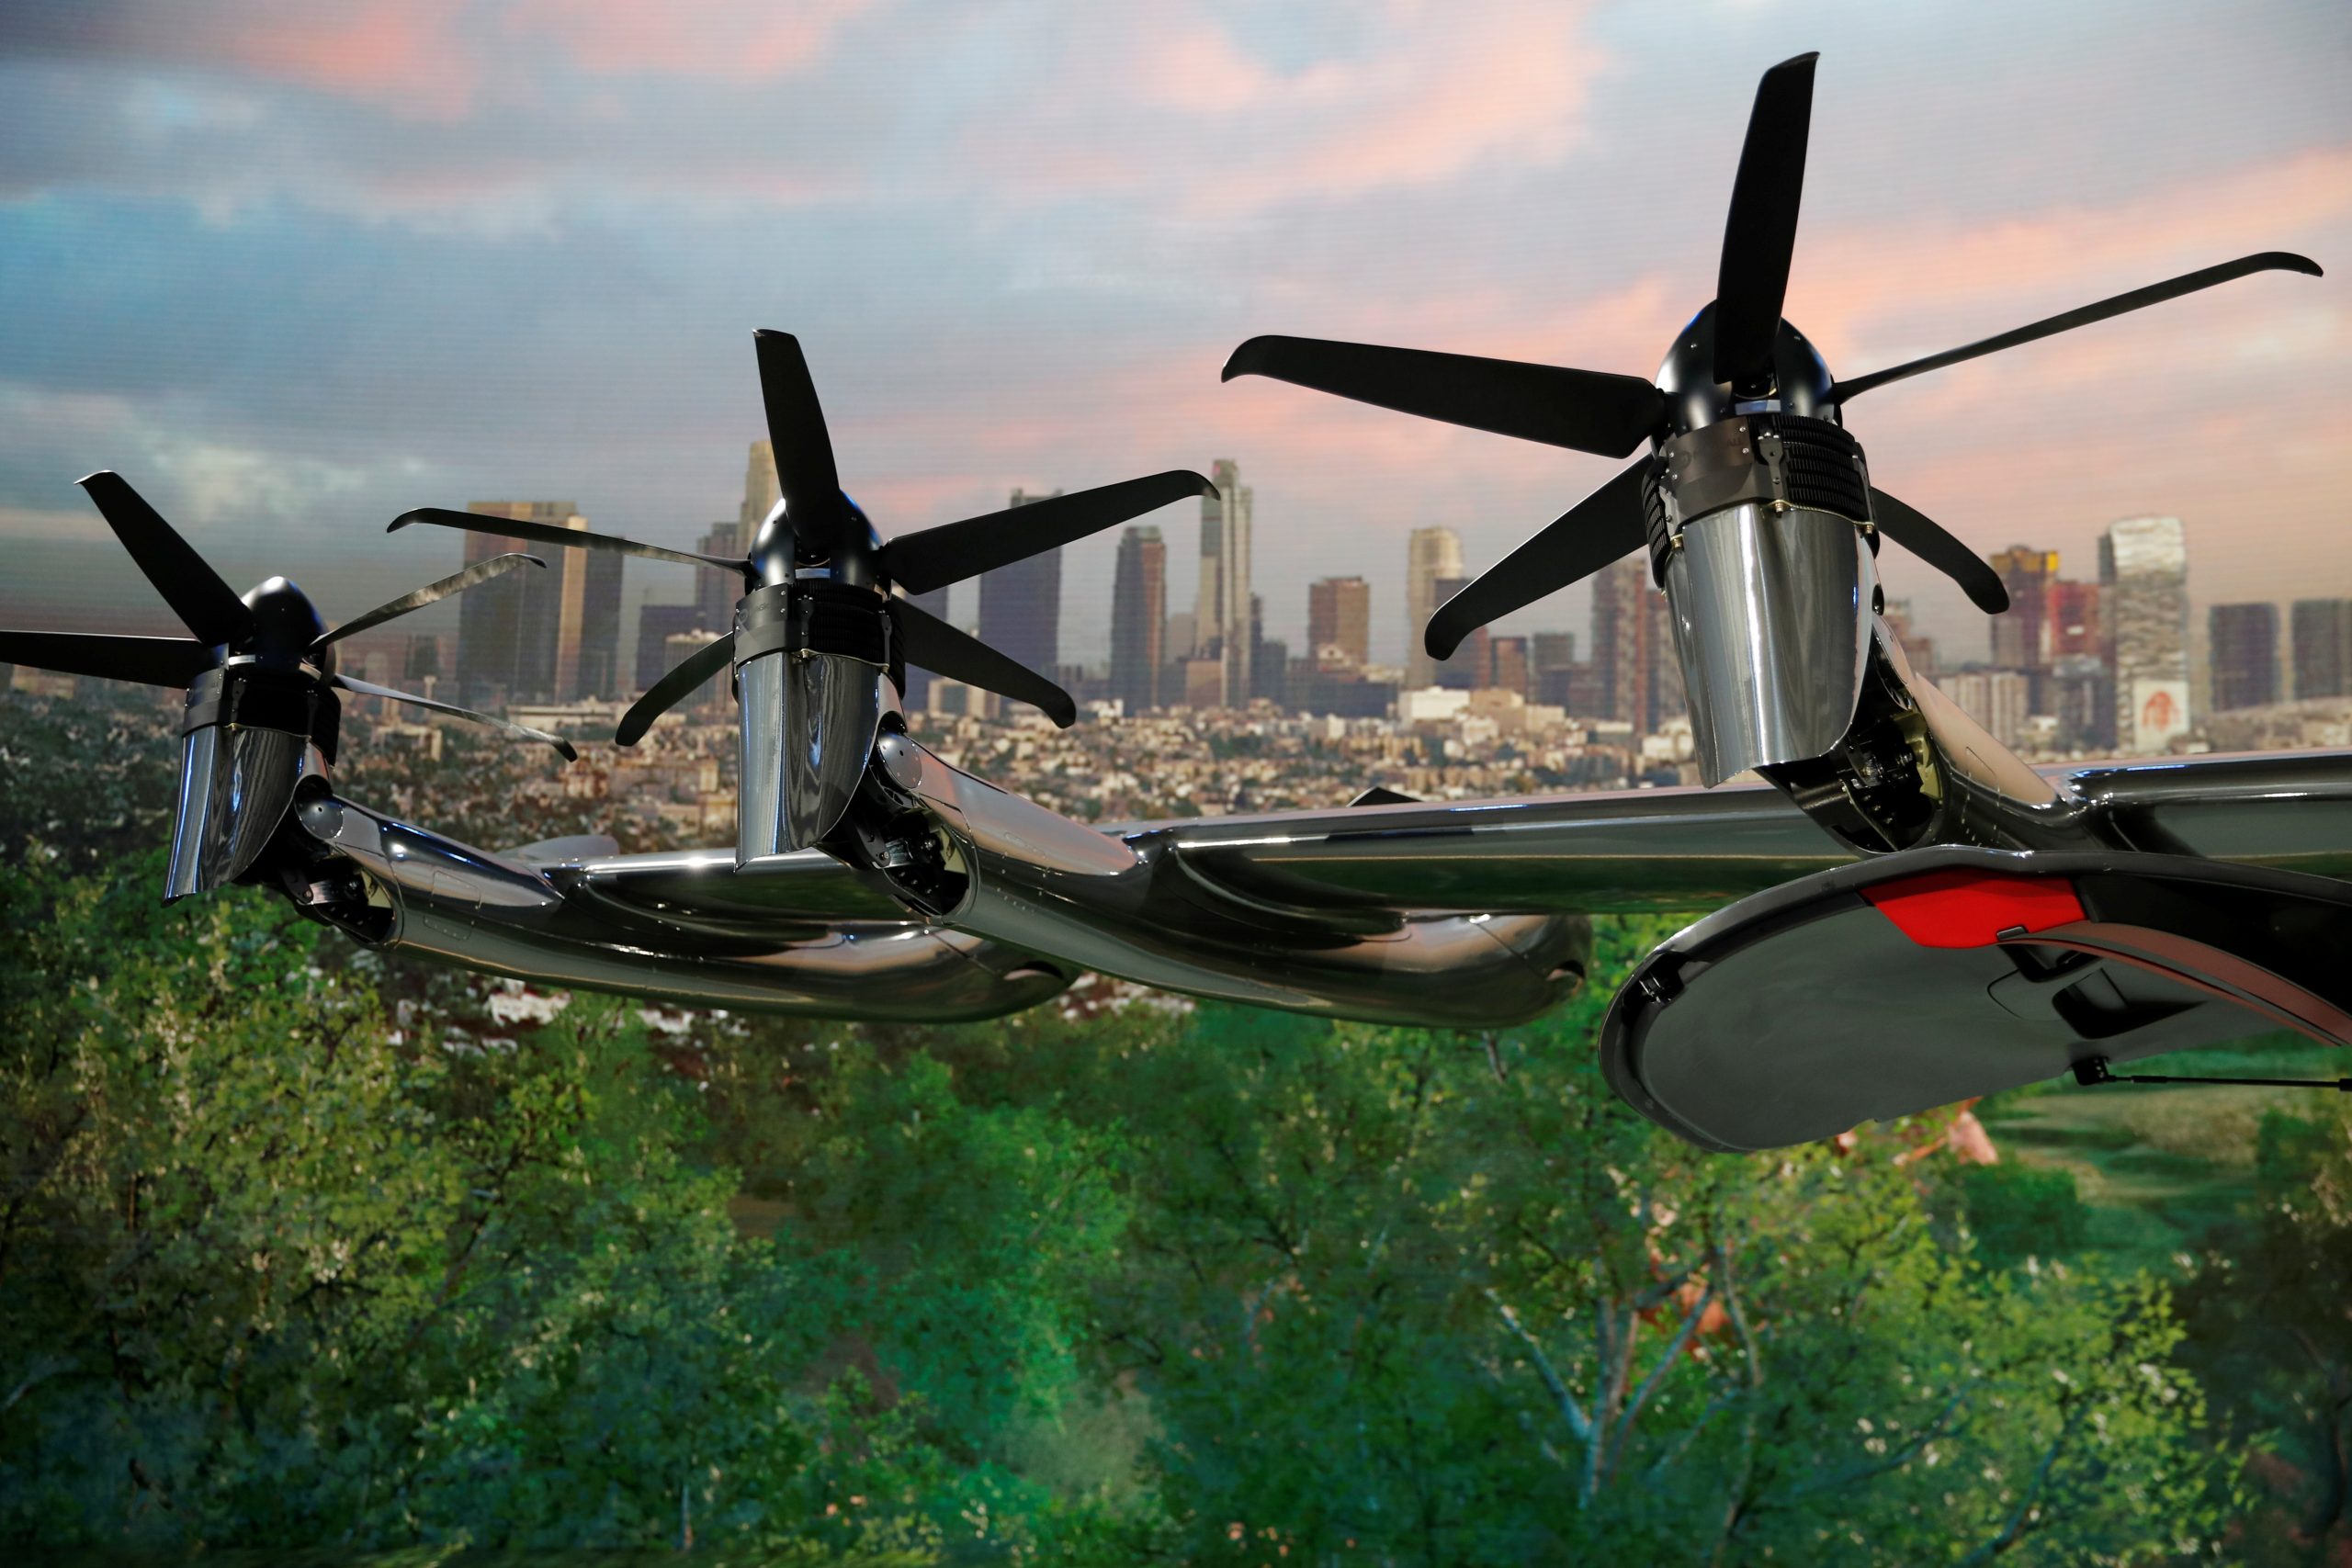  Archer’s flying taxi makes splashy debut in heated market